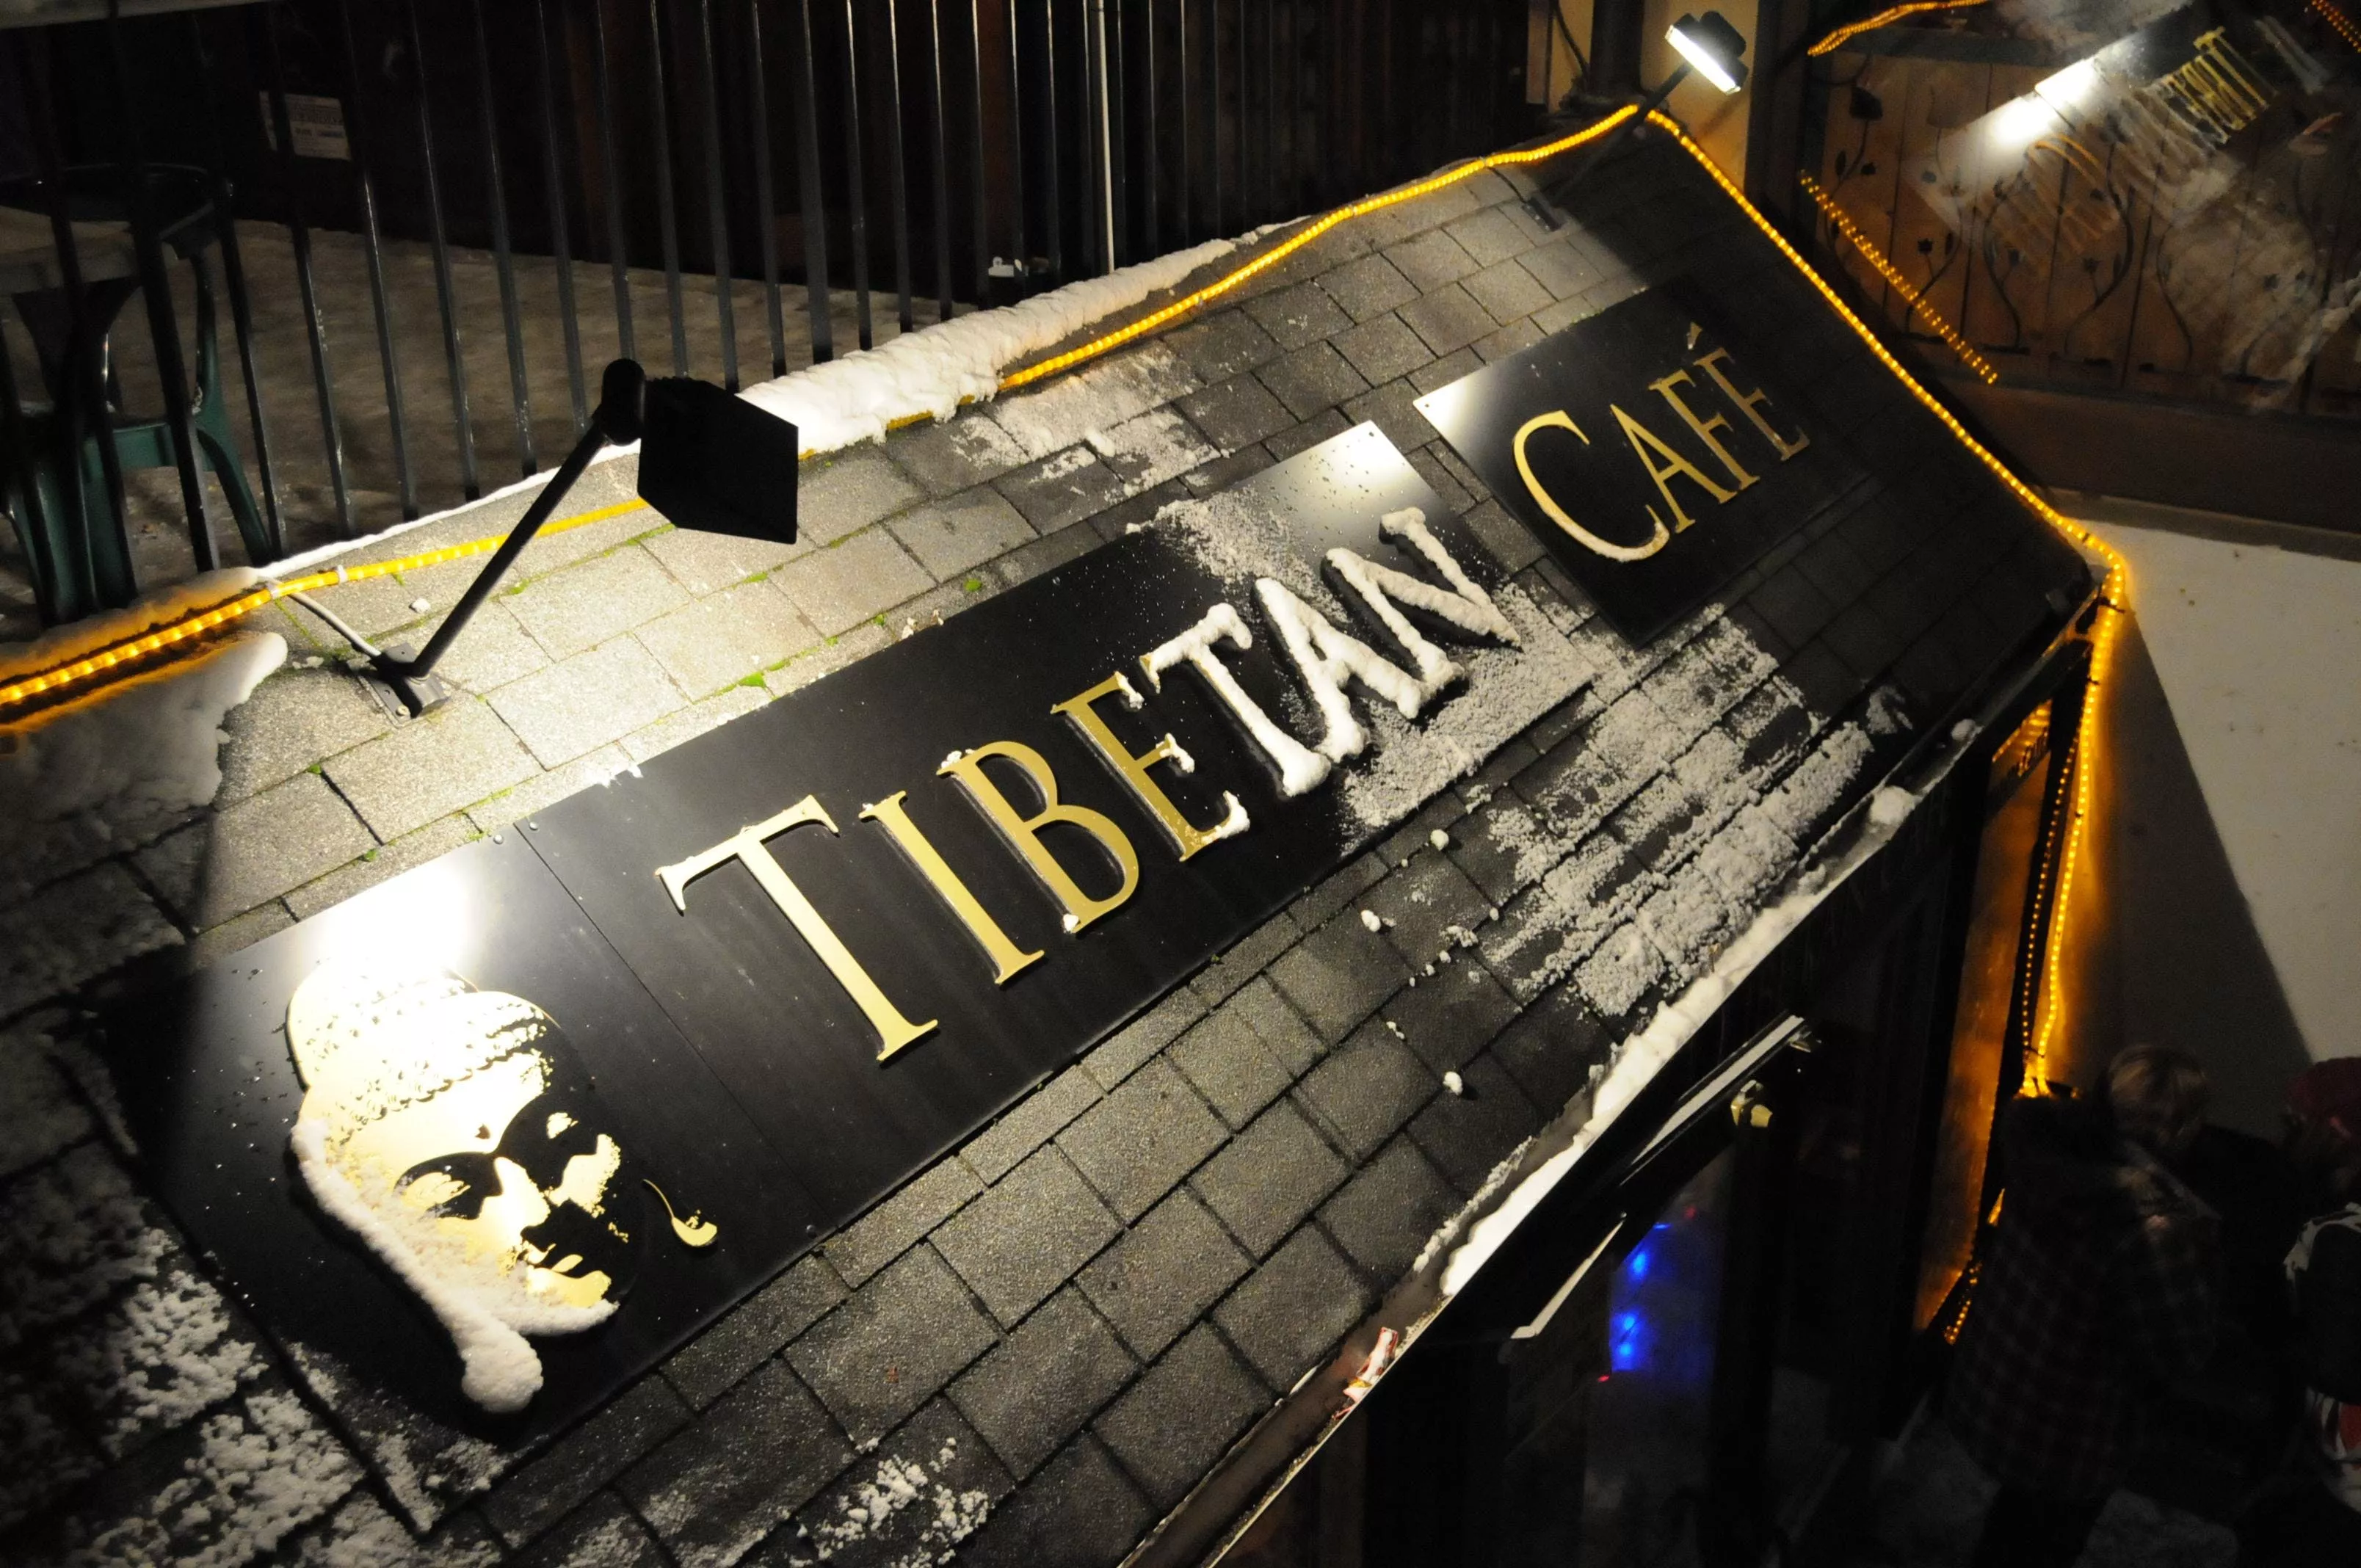 Tibetan Cafe in France, Europe | Cafes - Rated 0.8